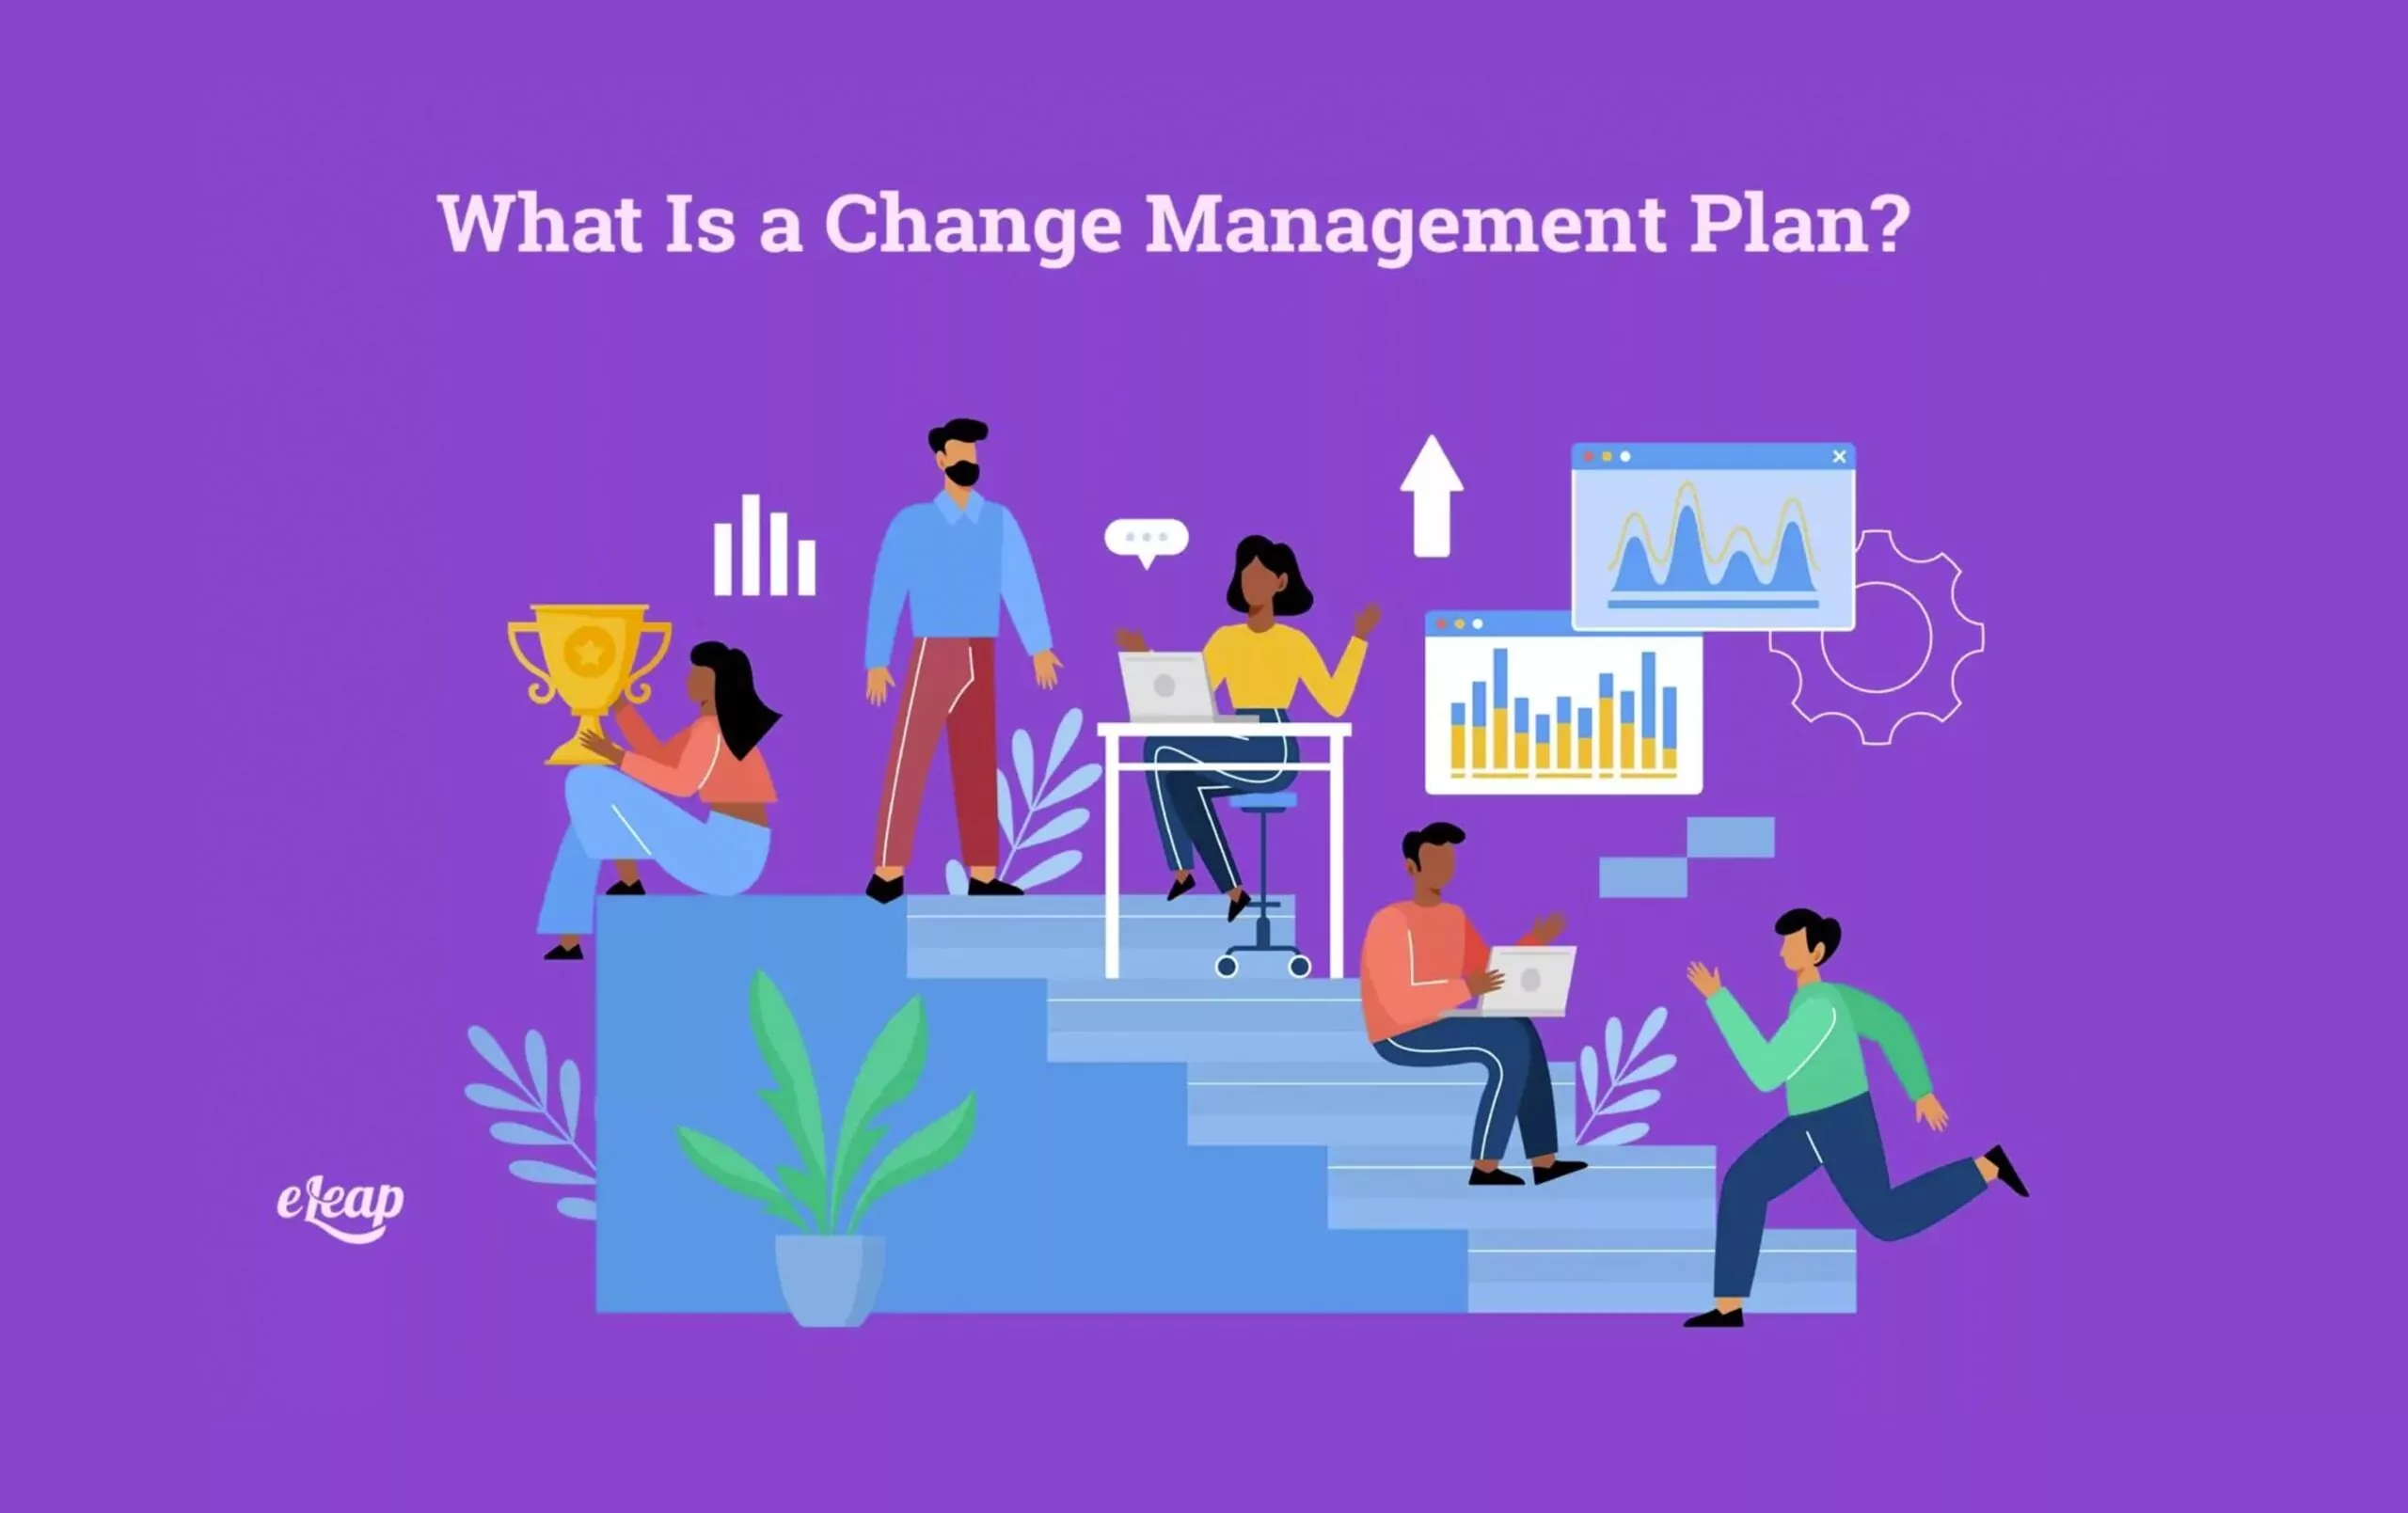 What Is a Change Management Plan?